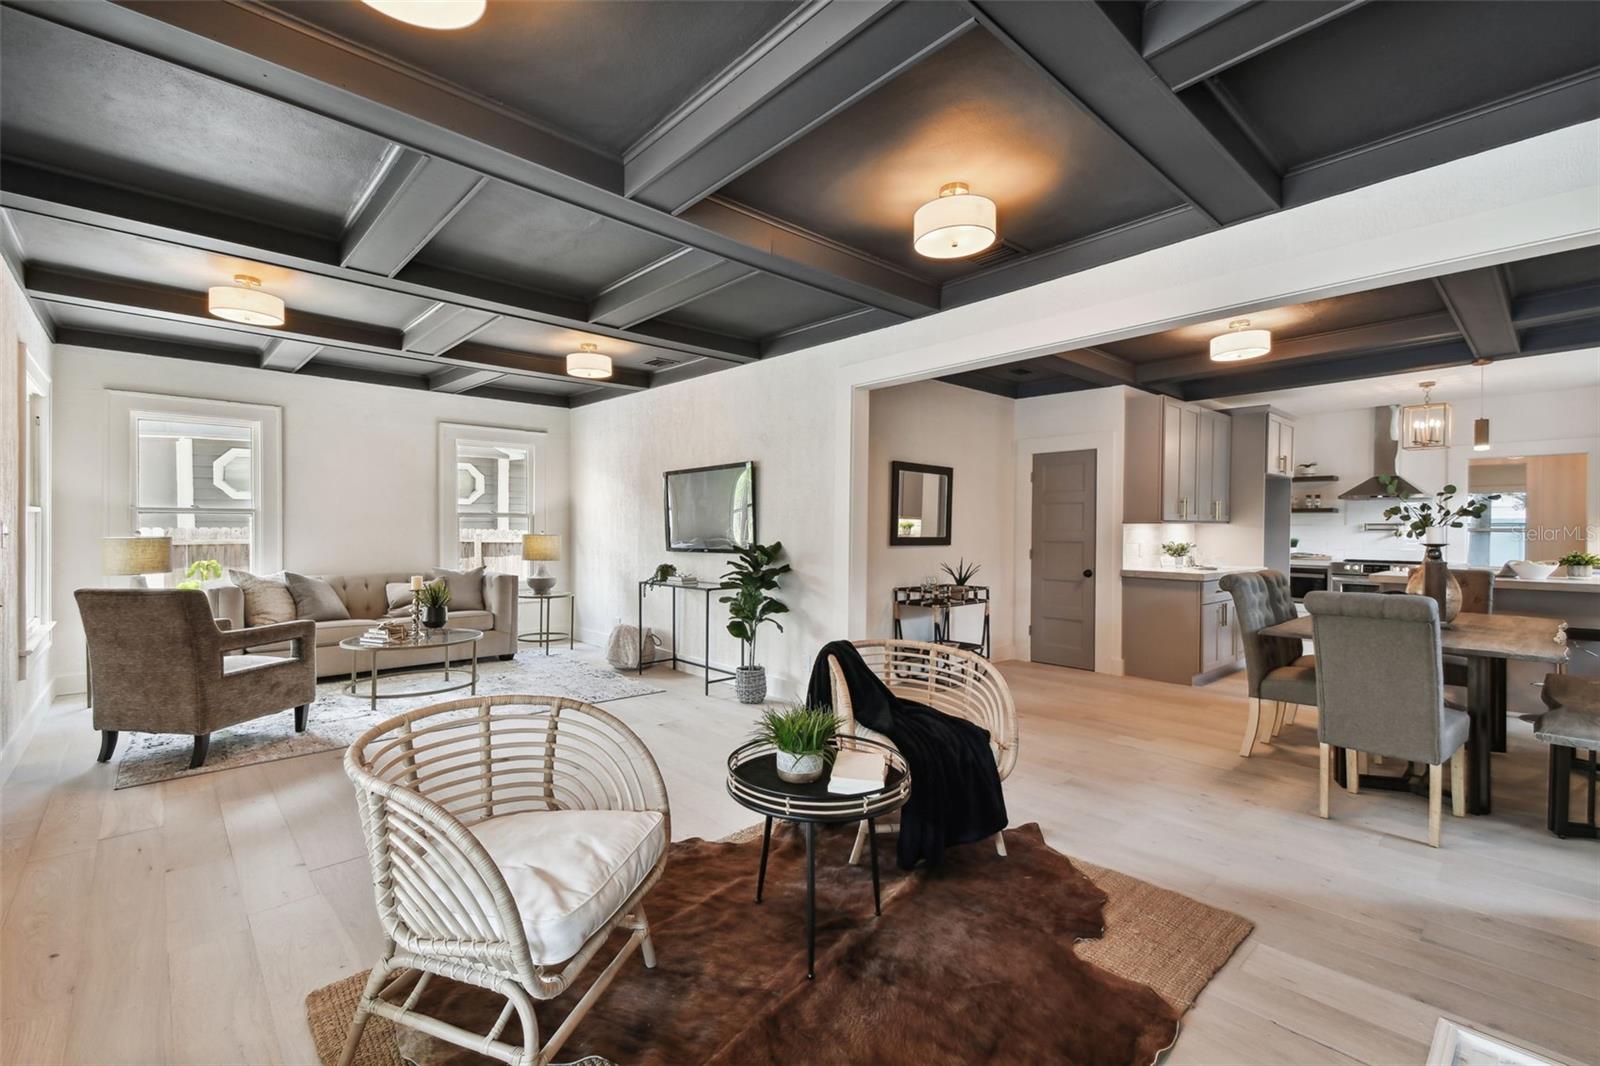 Coffered Ceilings - Wow